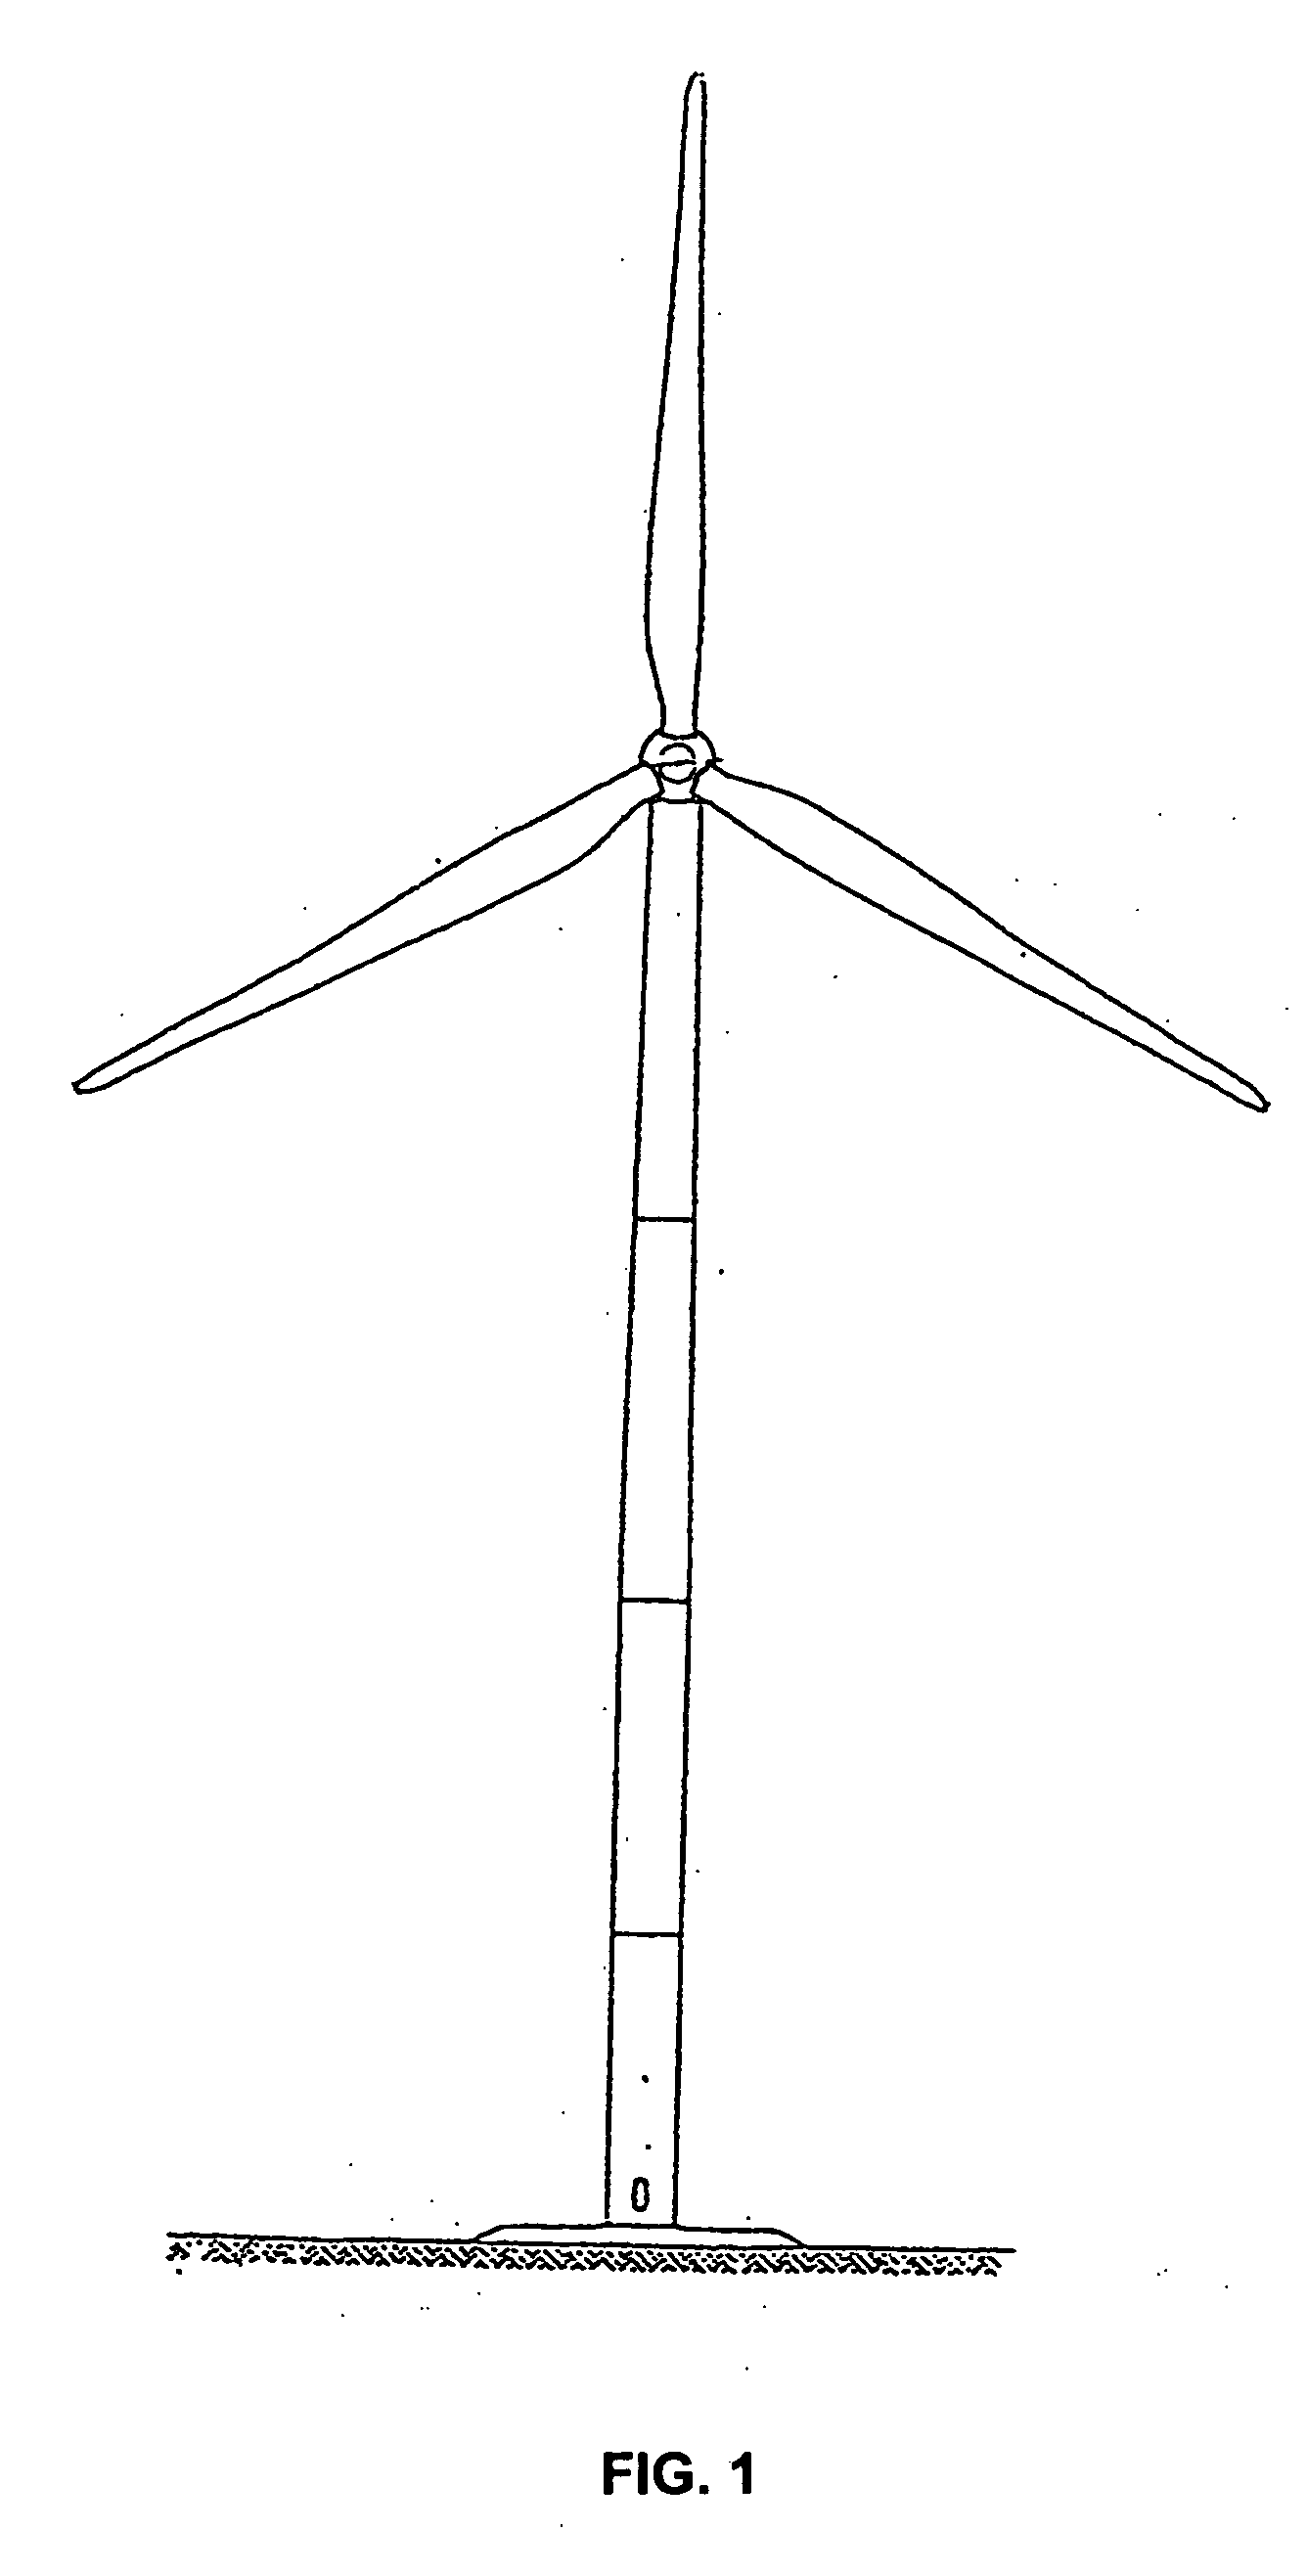 Management system for the operation of a wind turbine